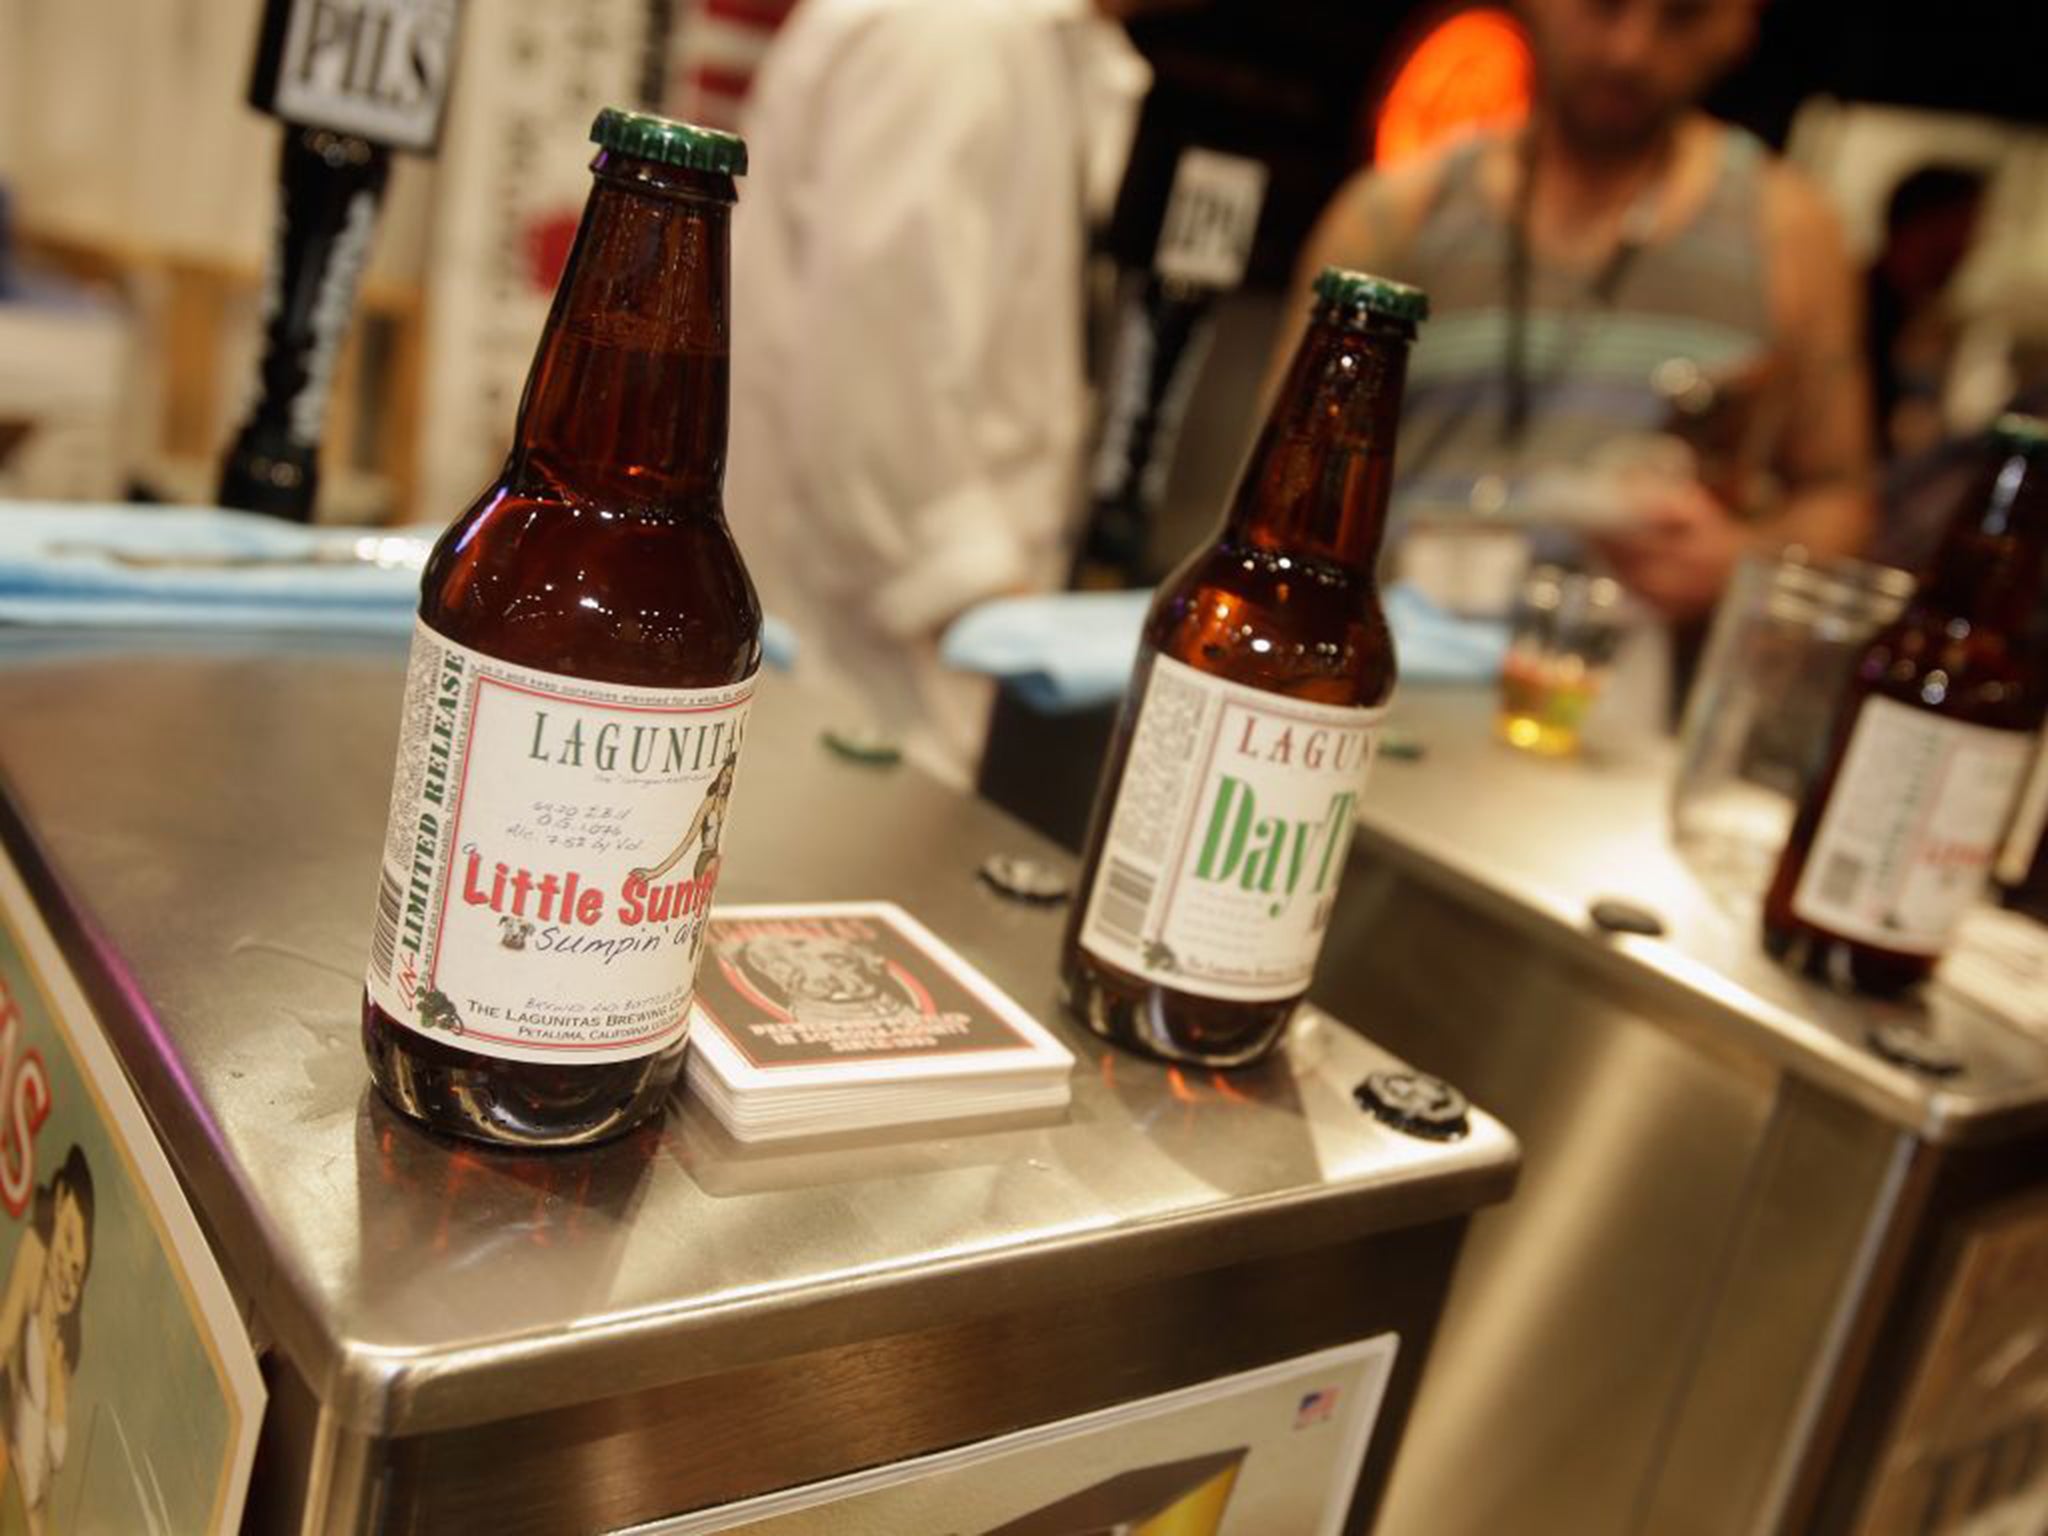 Lagunitas is best known for its India Pale Ale but makes more than 20 different beers